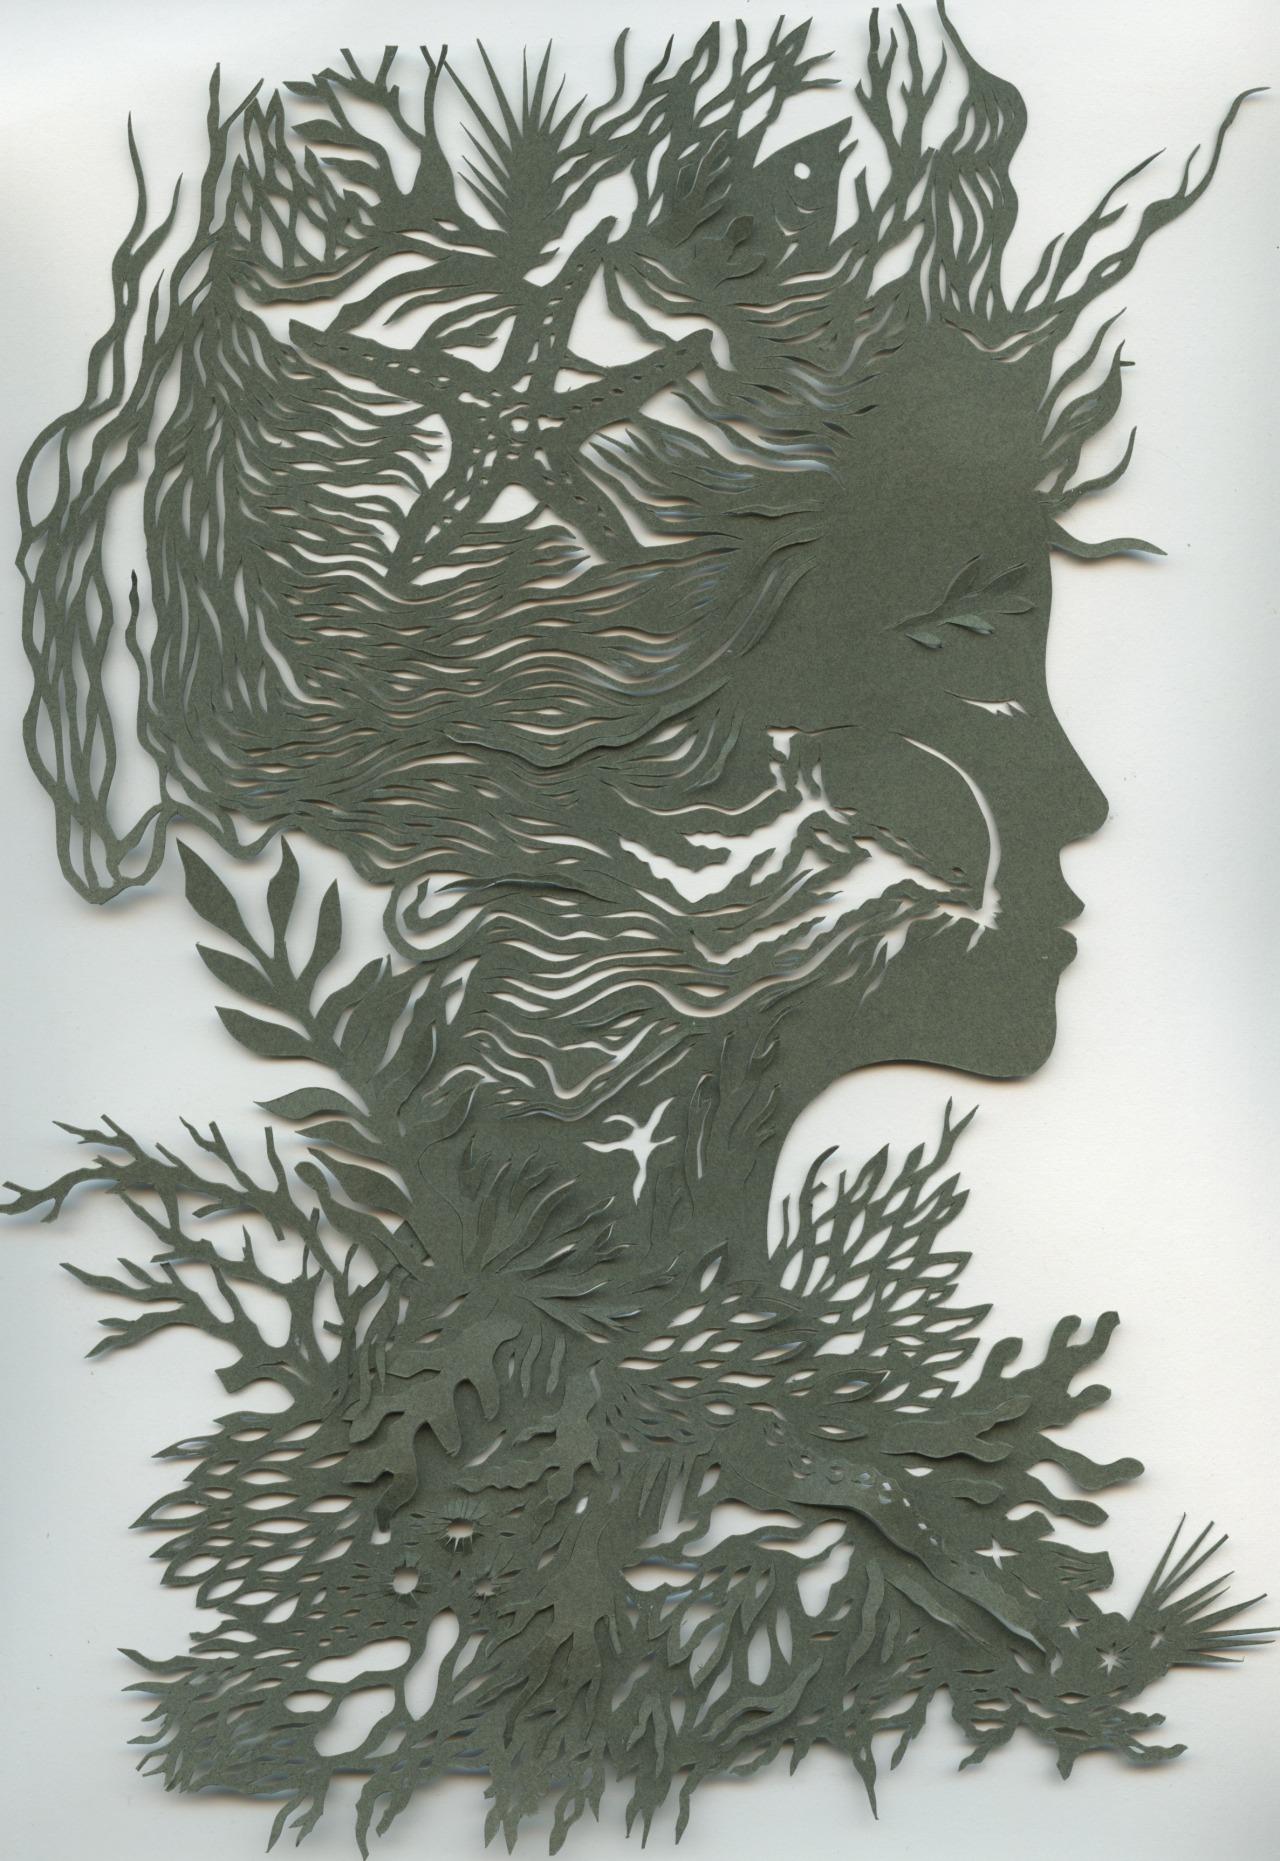 Paper cut from Evidence of Mermaids series, check out the just begun Evidence of Spring here: inkhead